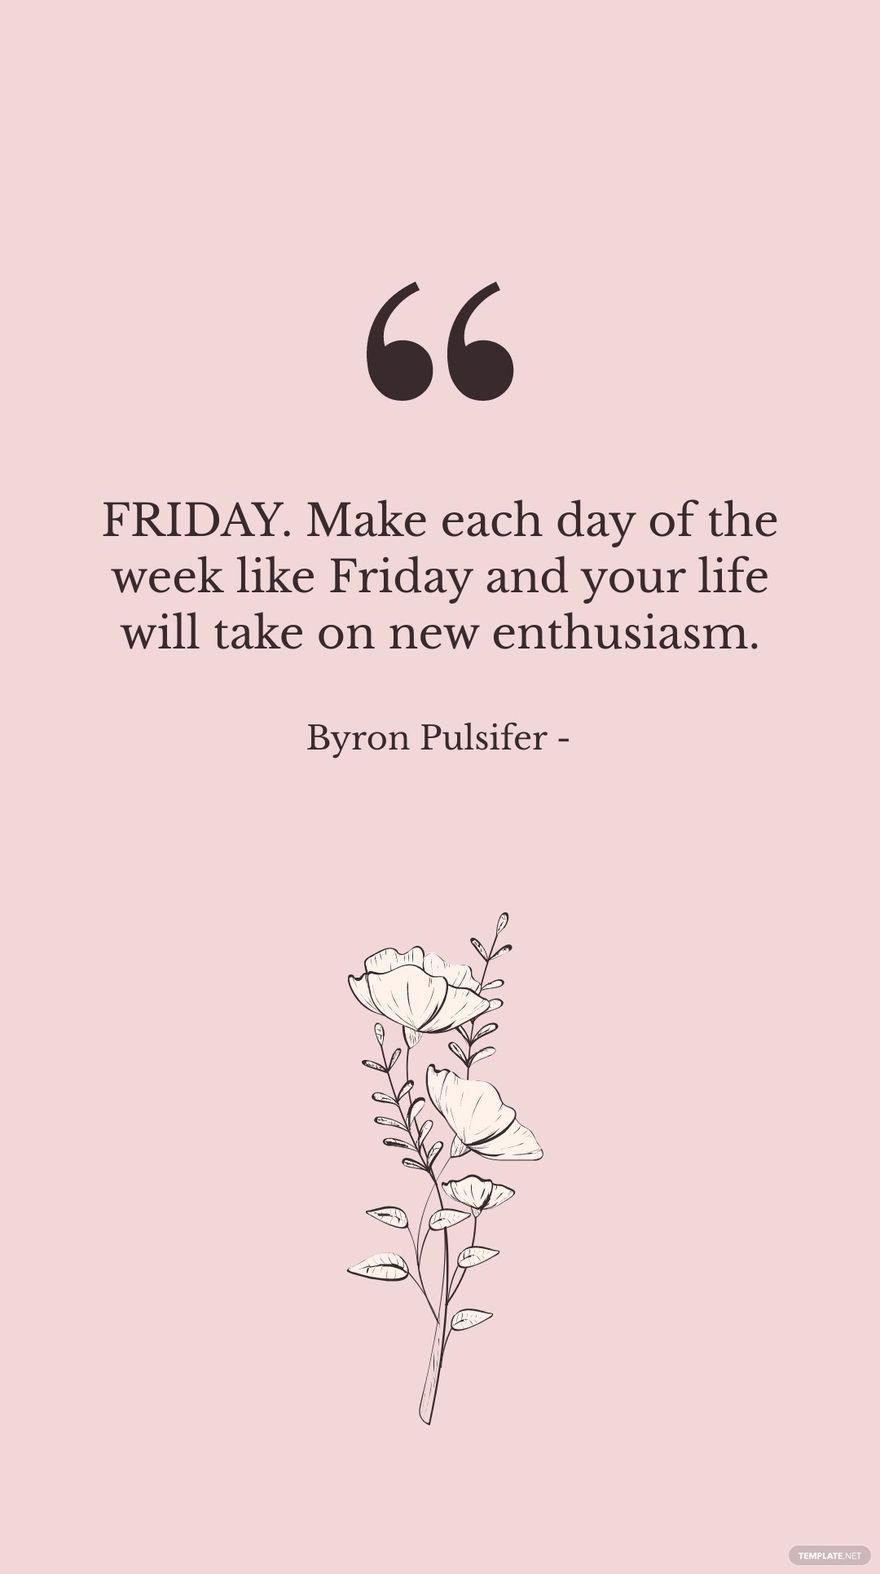 Byron Pulsifer - FRIDAY. Make each day of the week like Friday and your life will take on new enthusiasm.